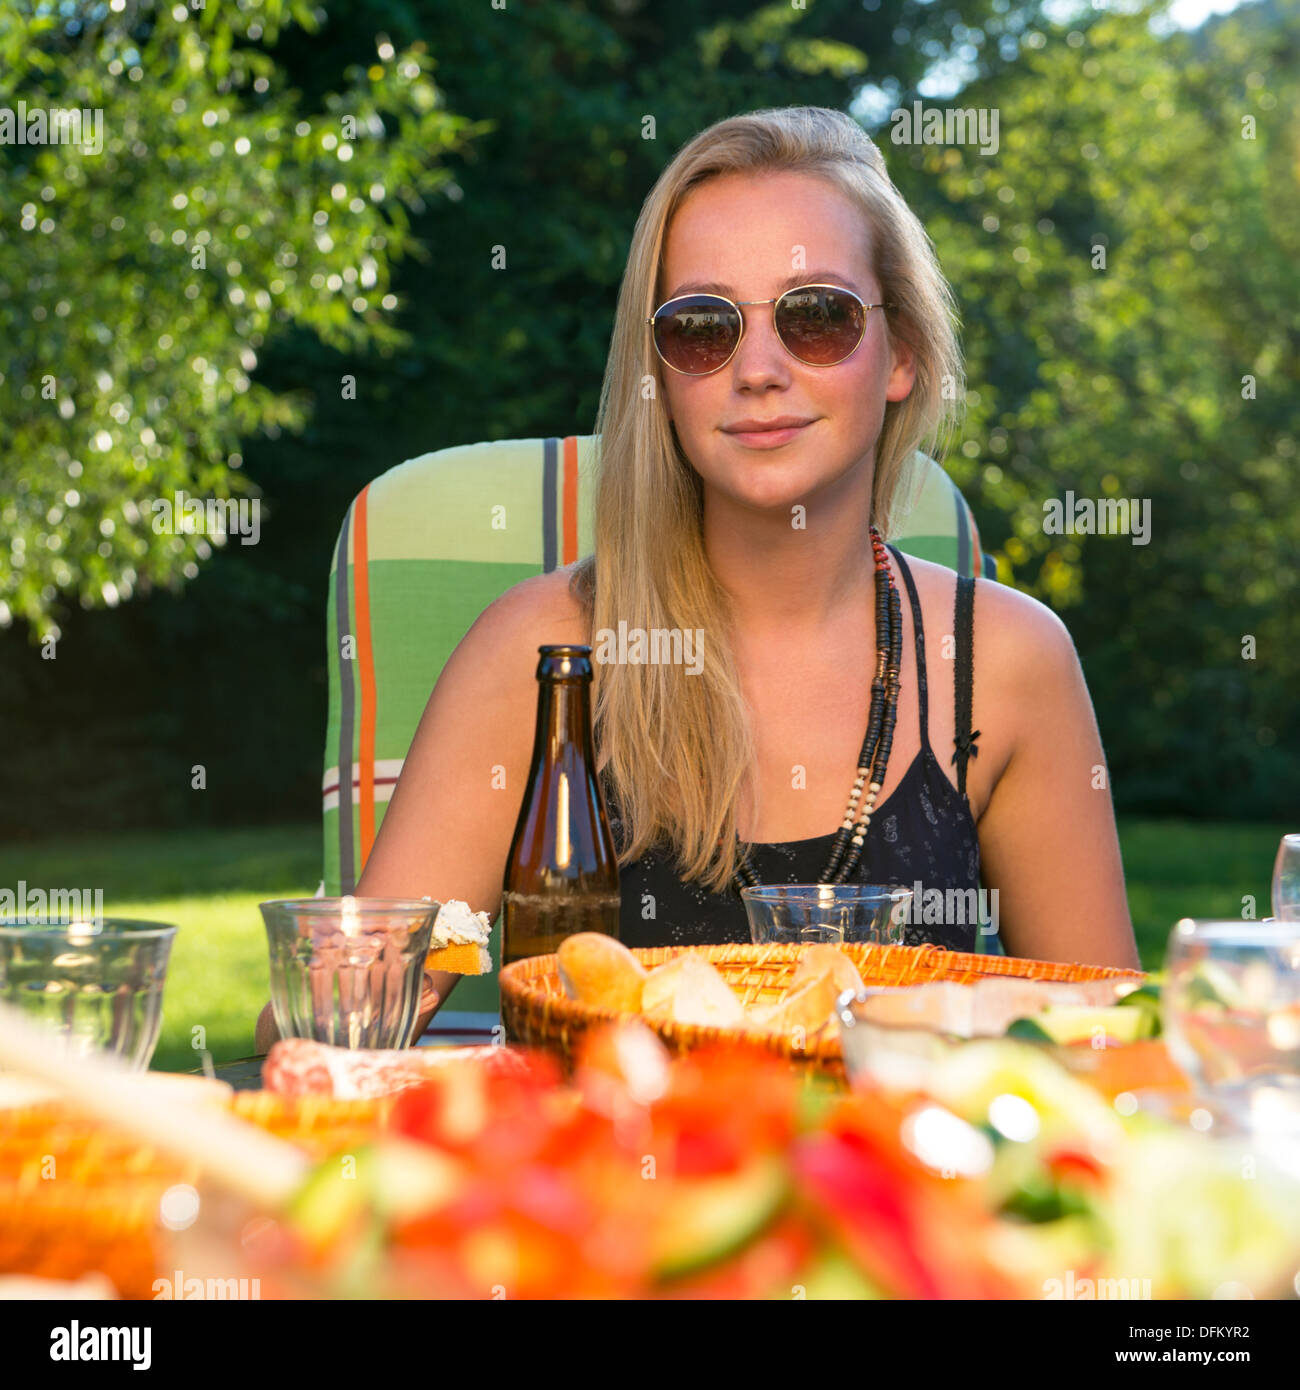 A young woman enjoying a garden party on a sunny afternoon Stock Photo